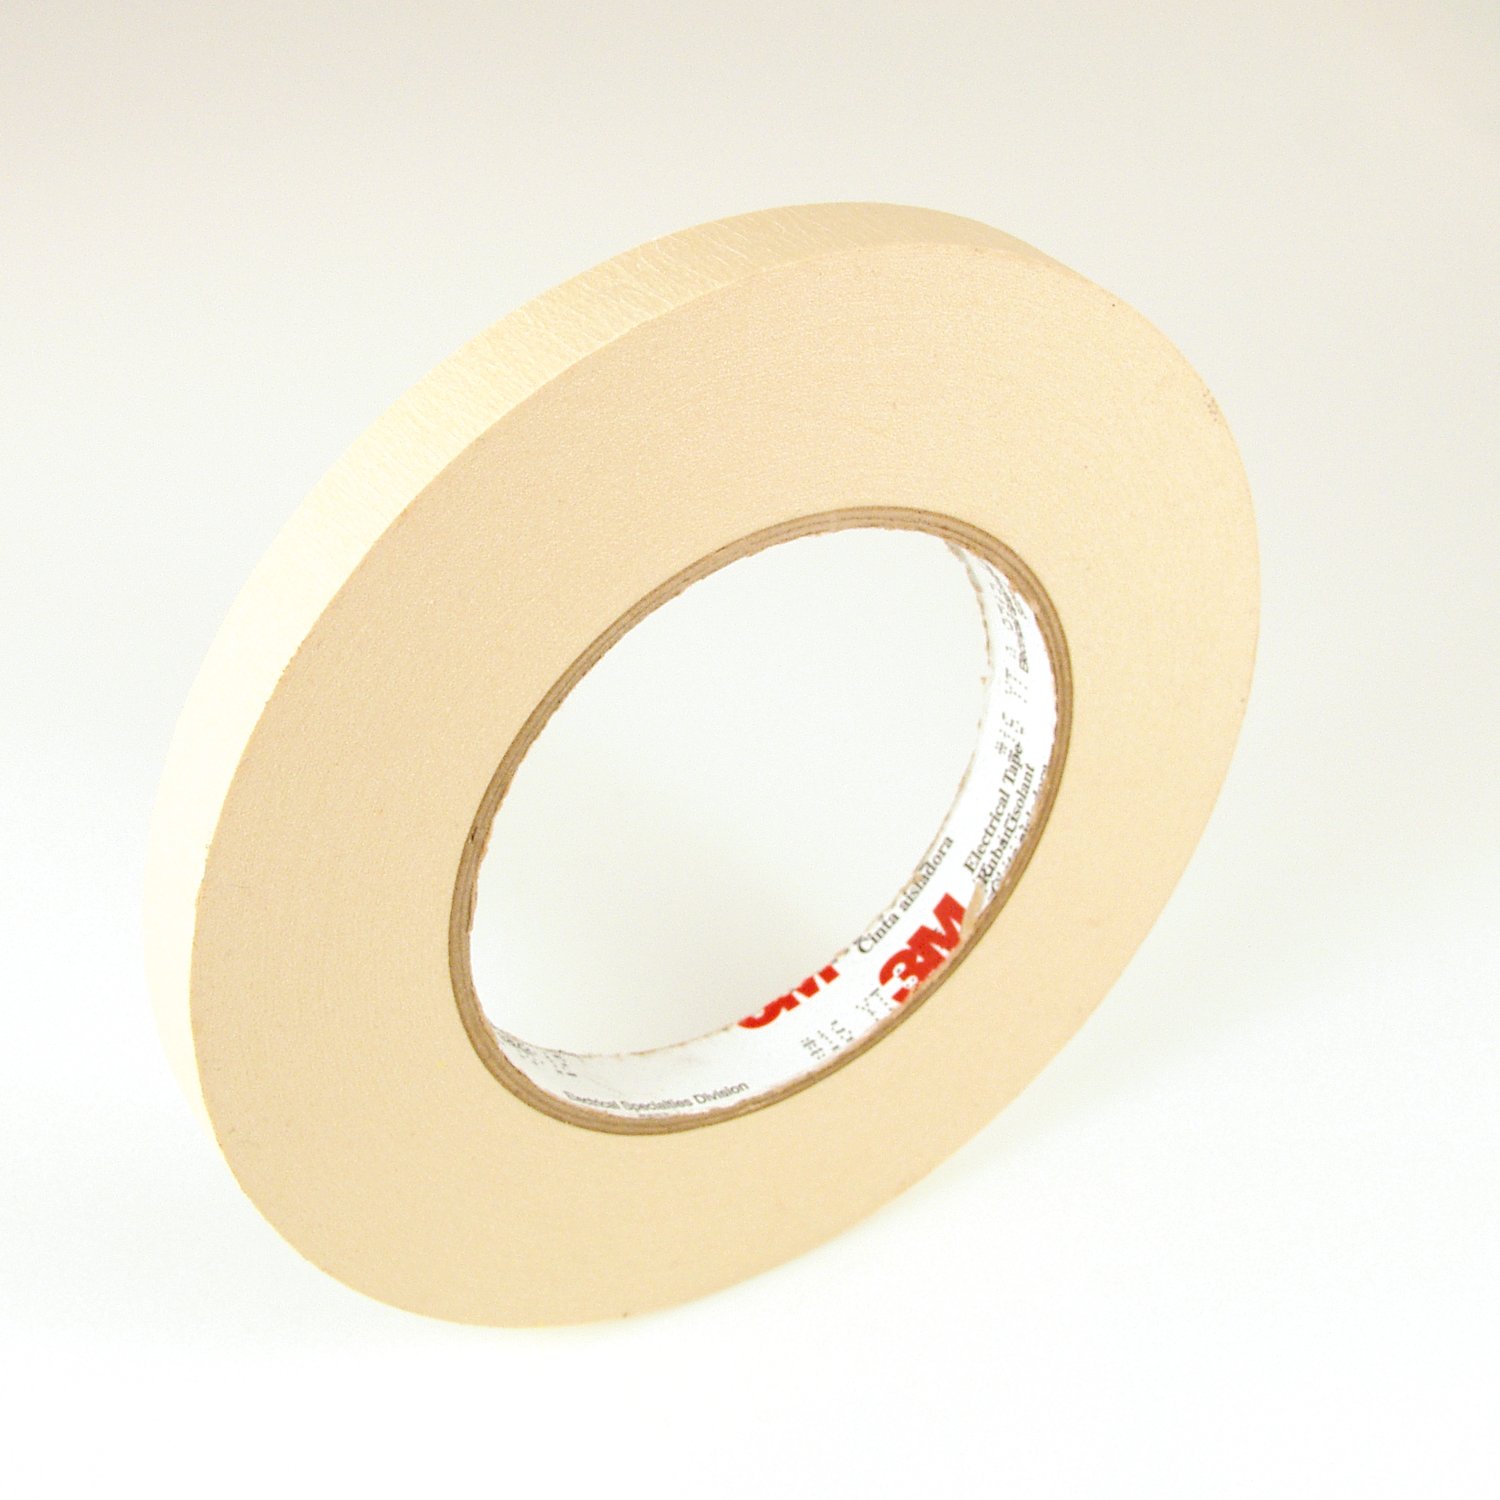 7000031600 - 3M Crepe Paper Electrical Tape 16, 1/2 in x 60 yd, 3" Paper Core, 72
Rolls/Case